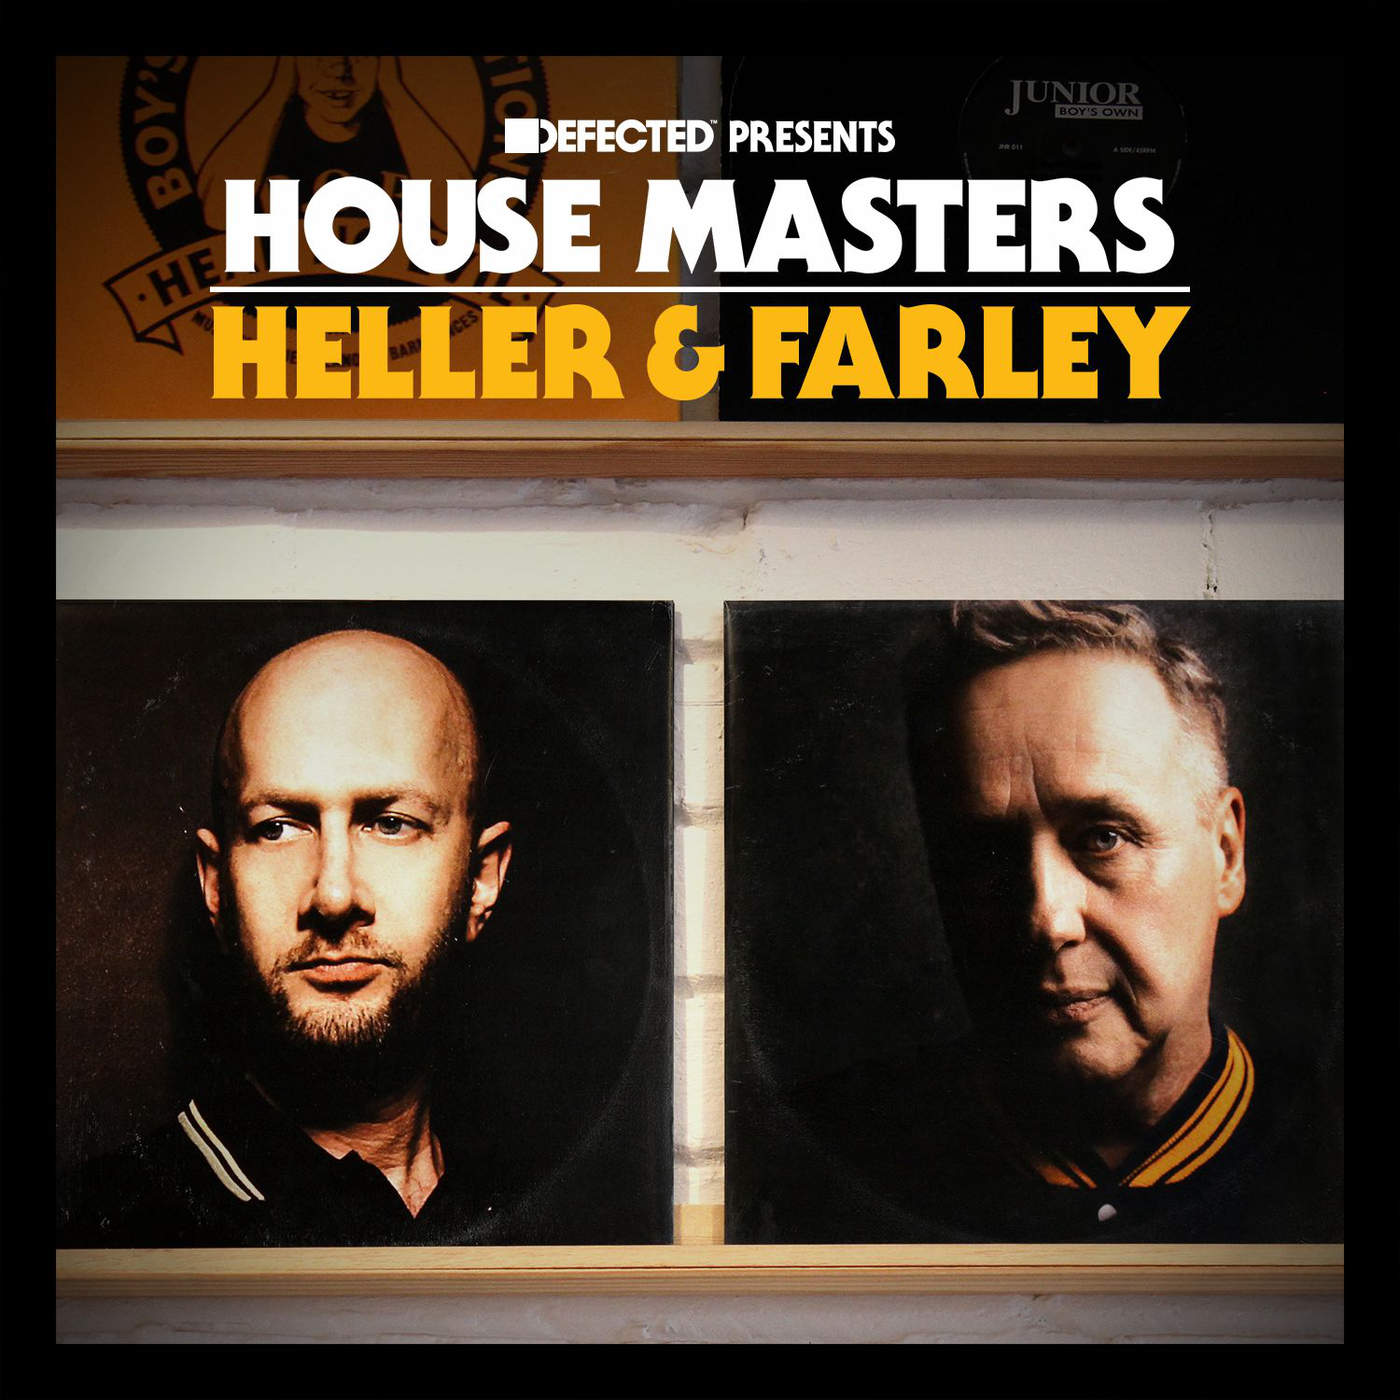 00 VA - Defected Presents House Masters Heller and Farley Cover